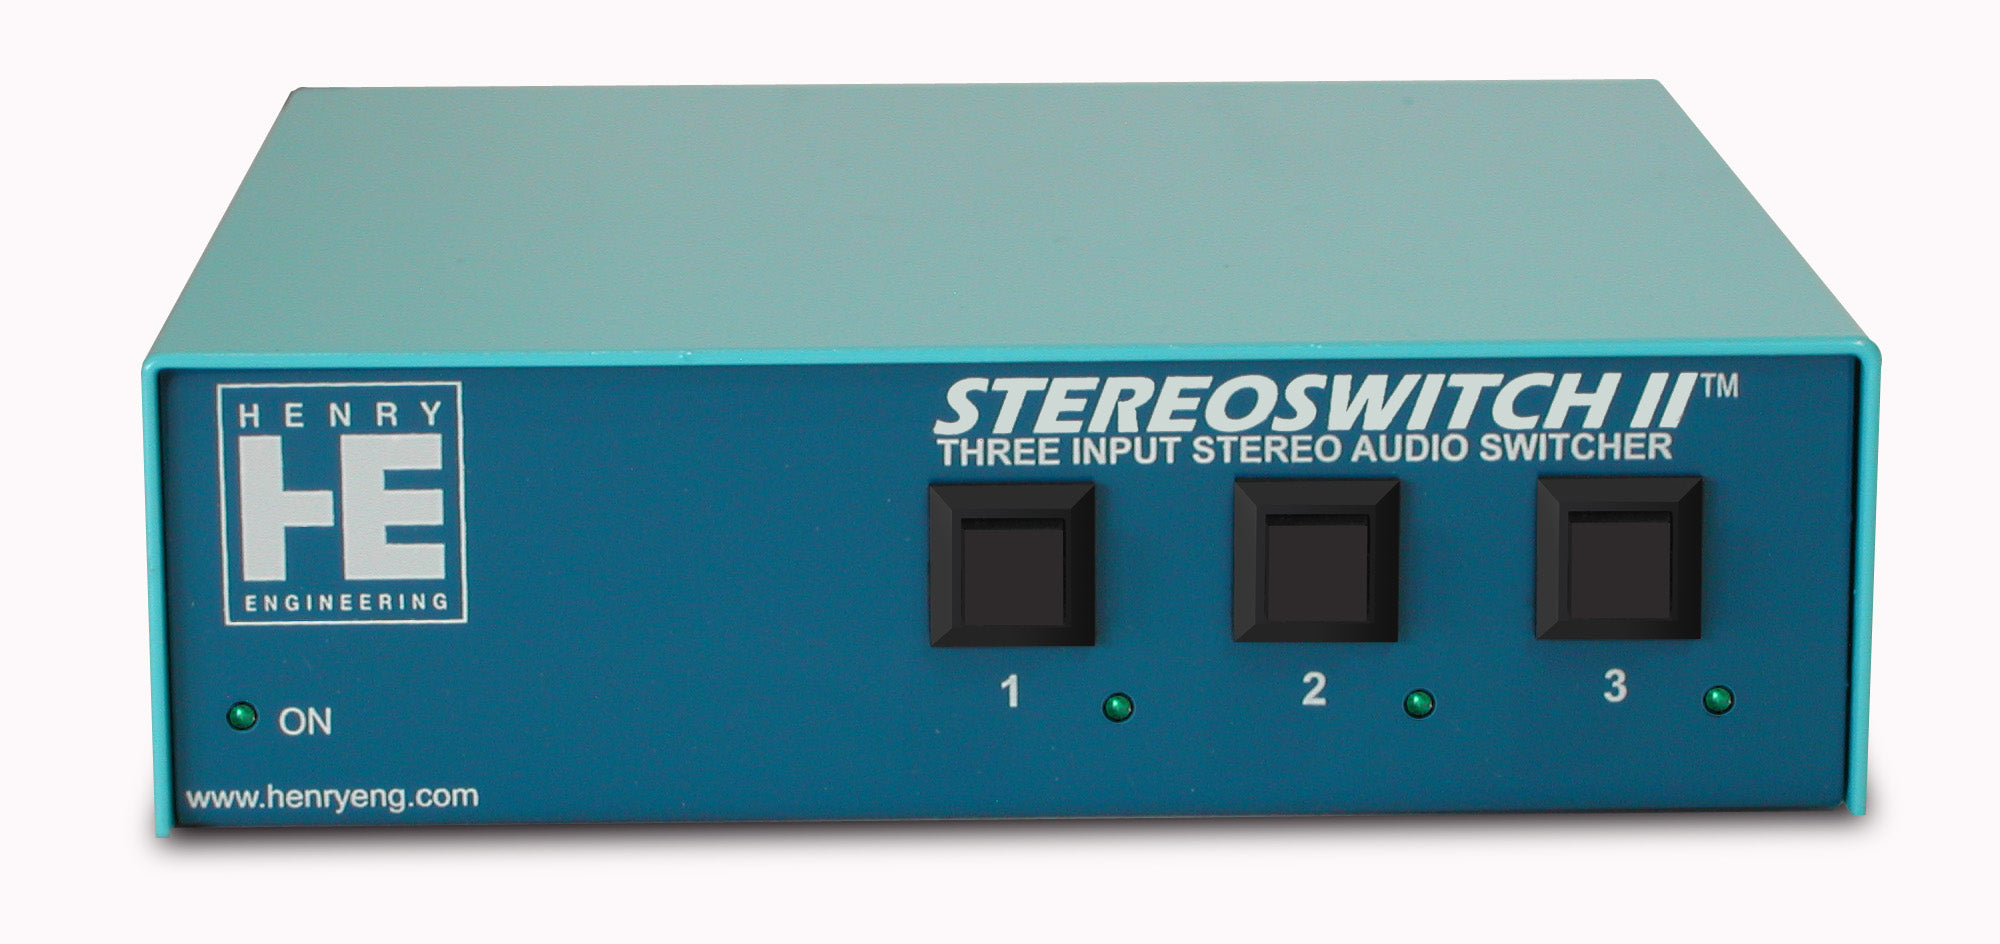 Henry Engineering STEREOSWITCH II™ - 3-INPUT STEREO AUDIO SWITCHER - 305broadcast